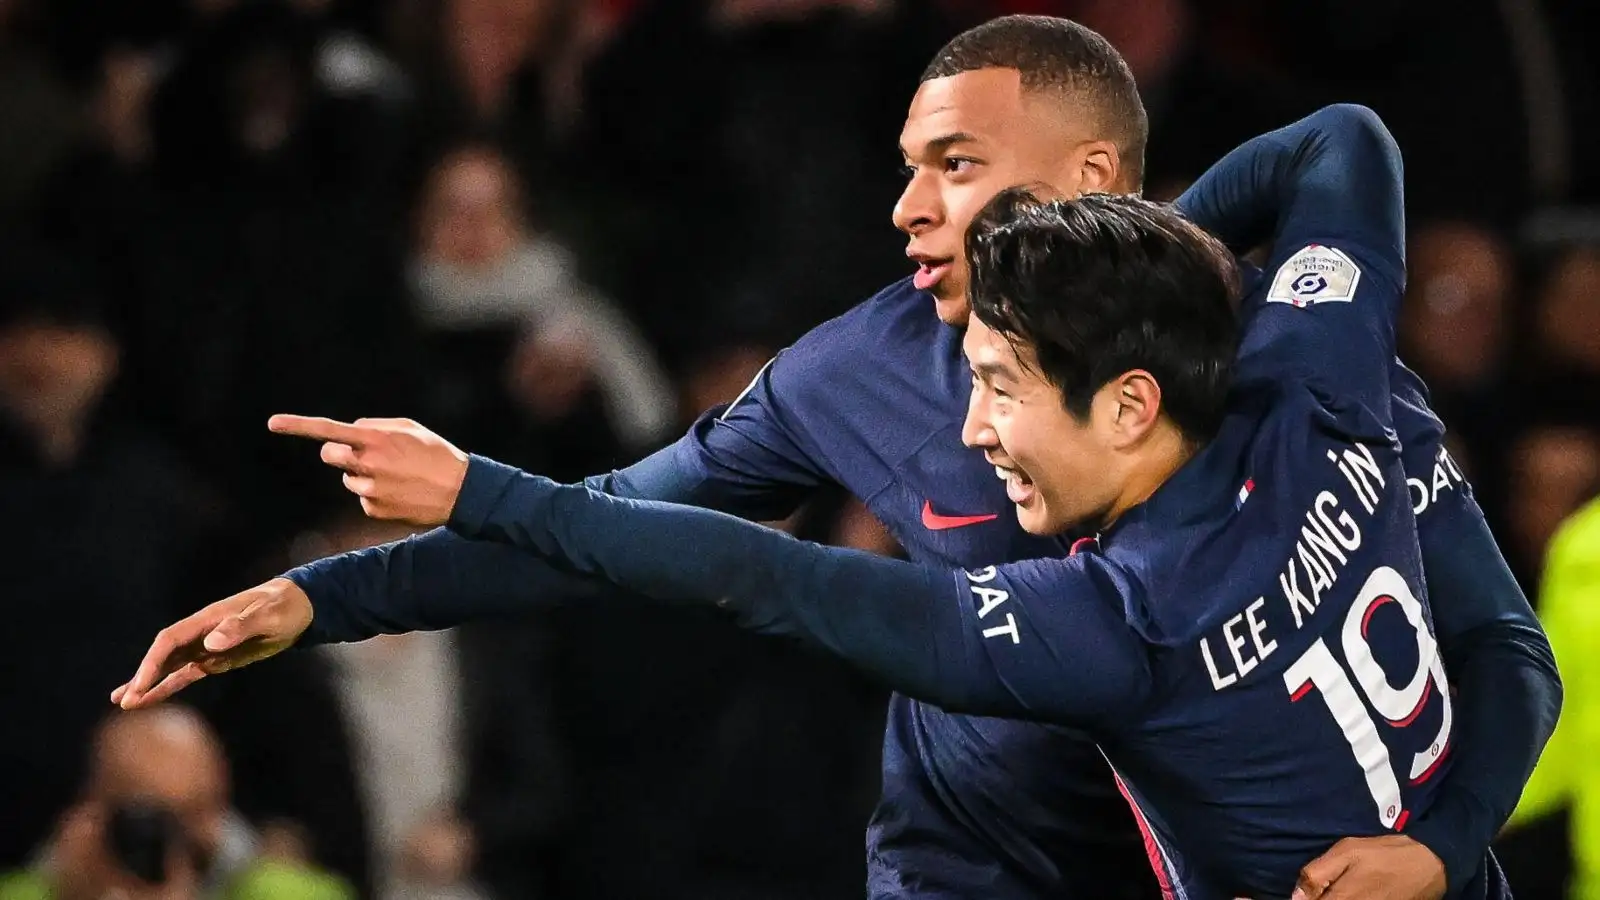 PSG onward Kylian Mbappe memorializes a liveliness through Lee Kang-in.